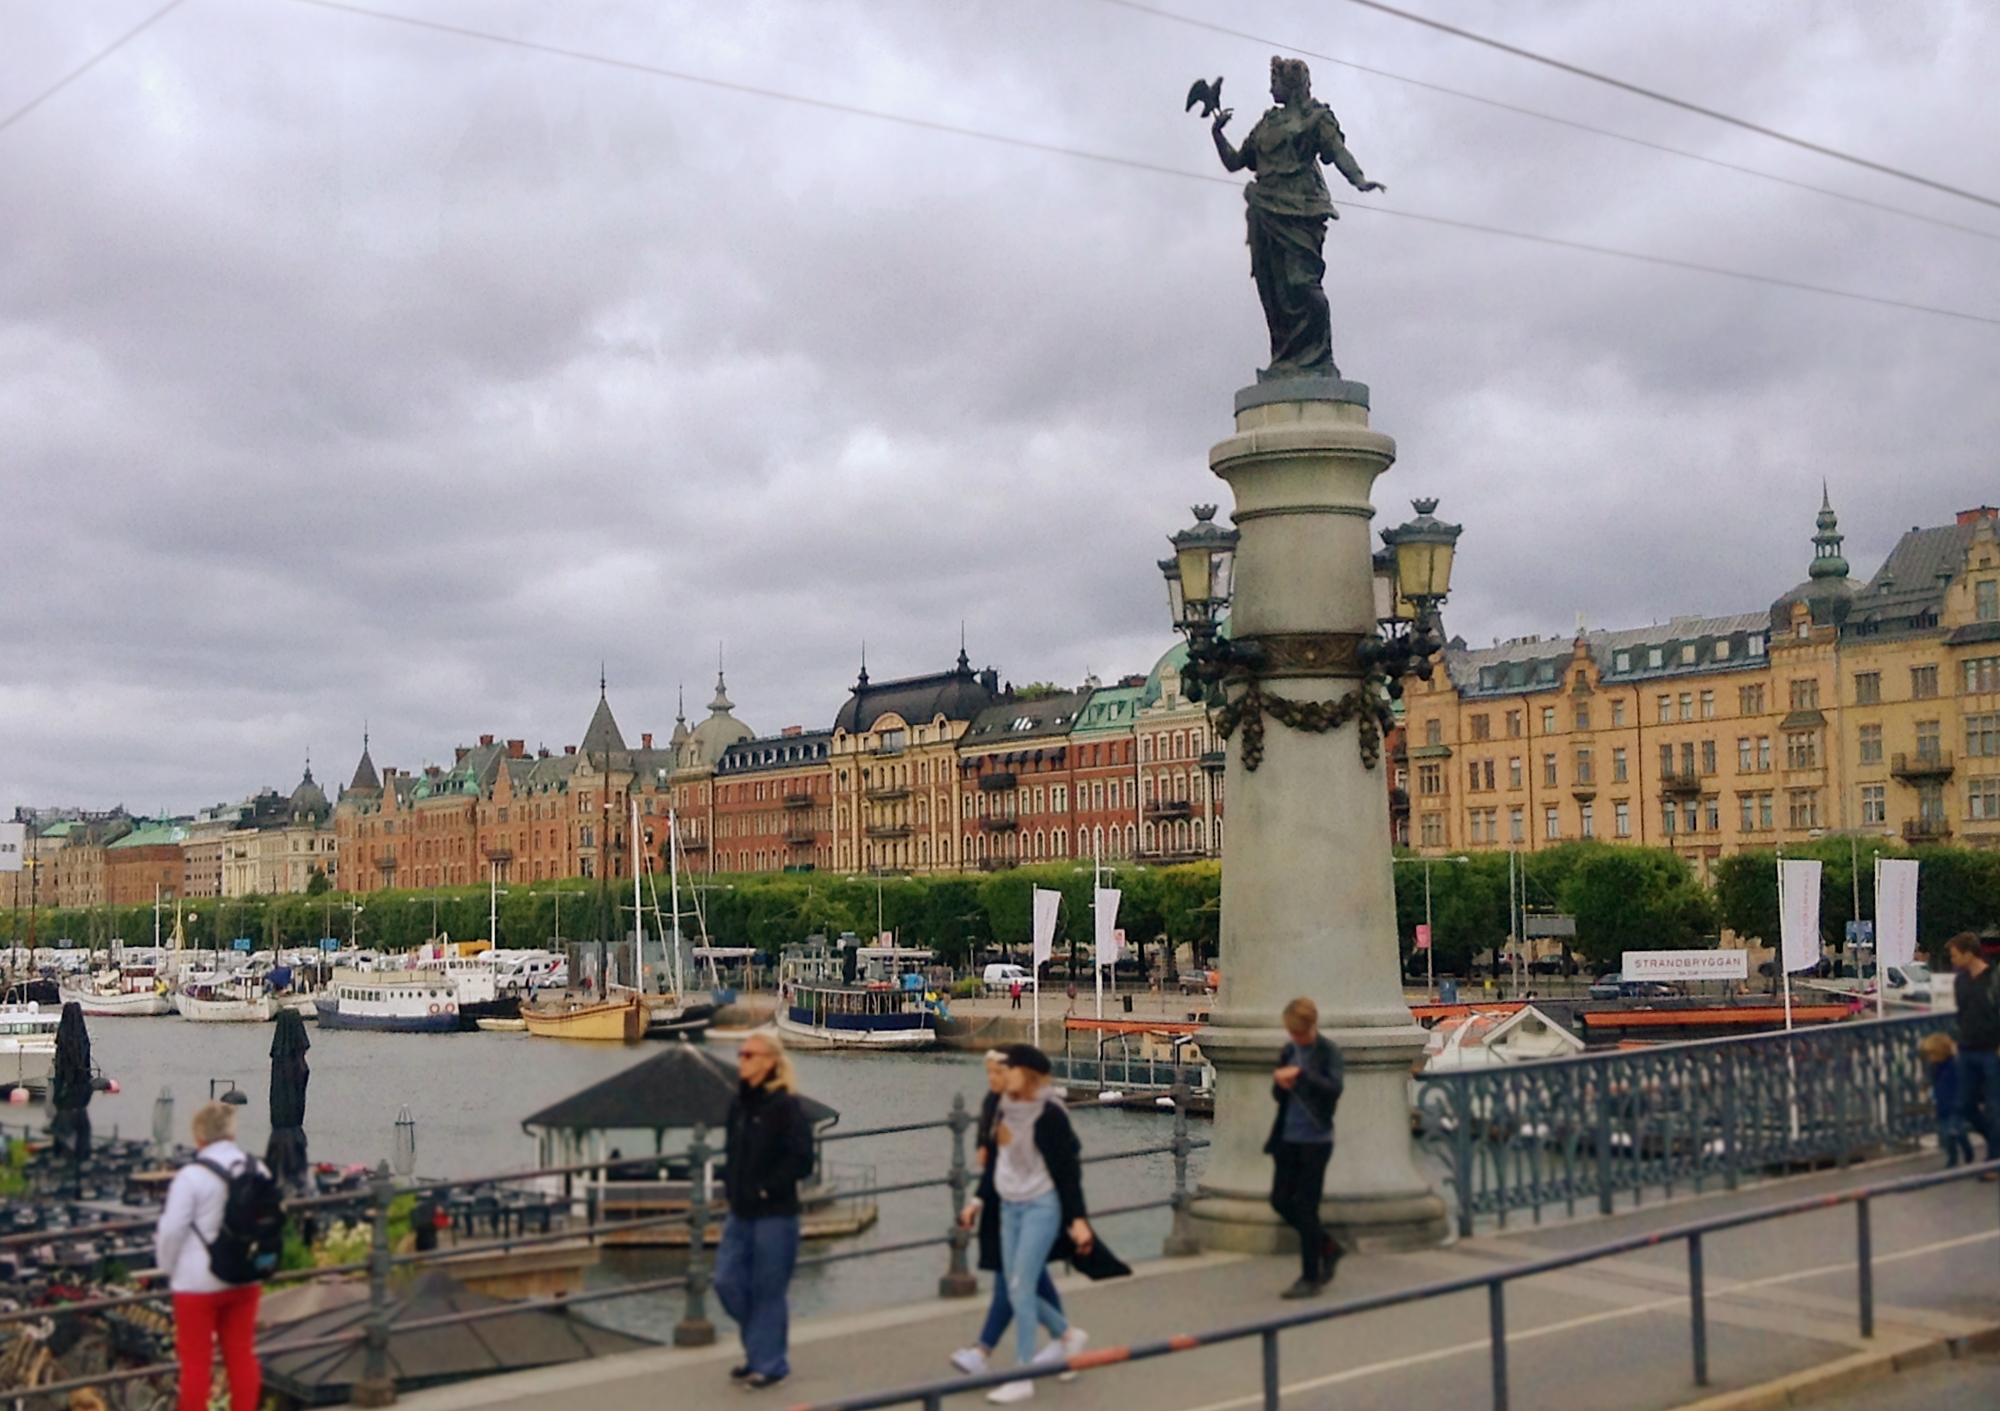 Stockholm: A Little Town With Big History